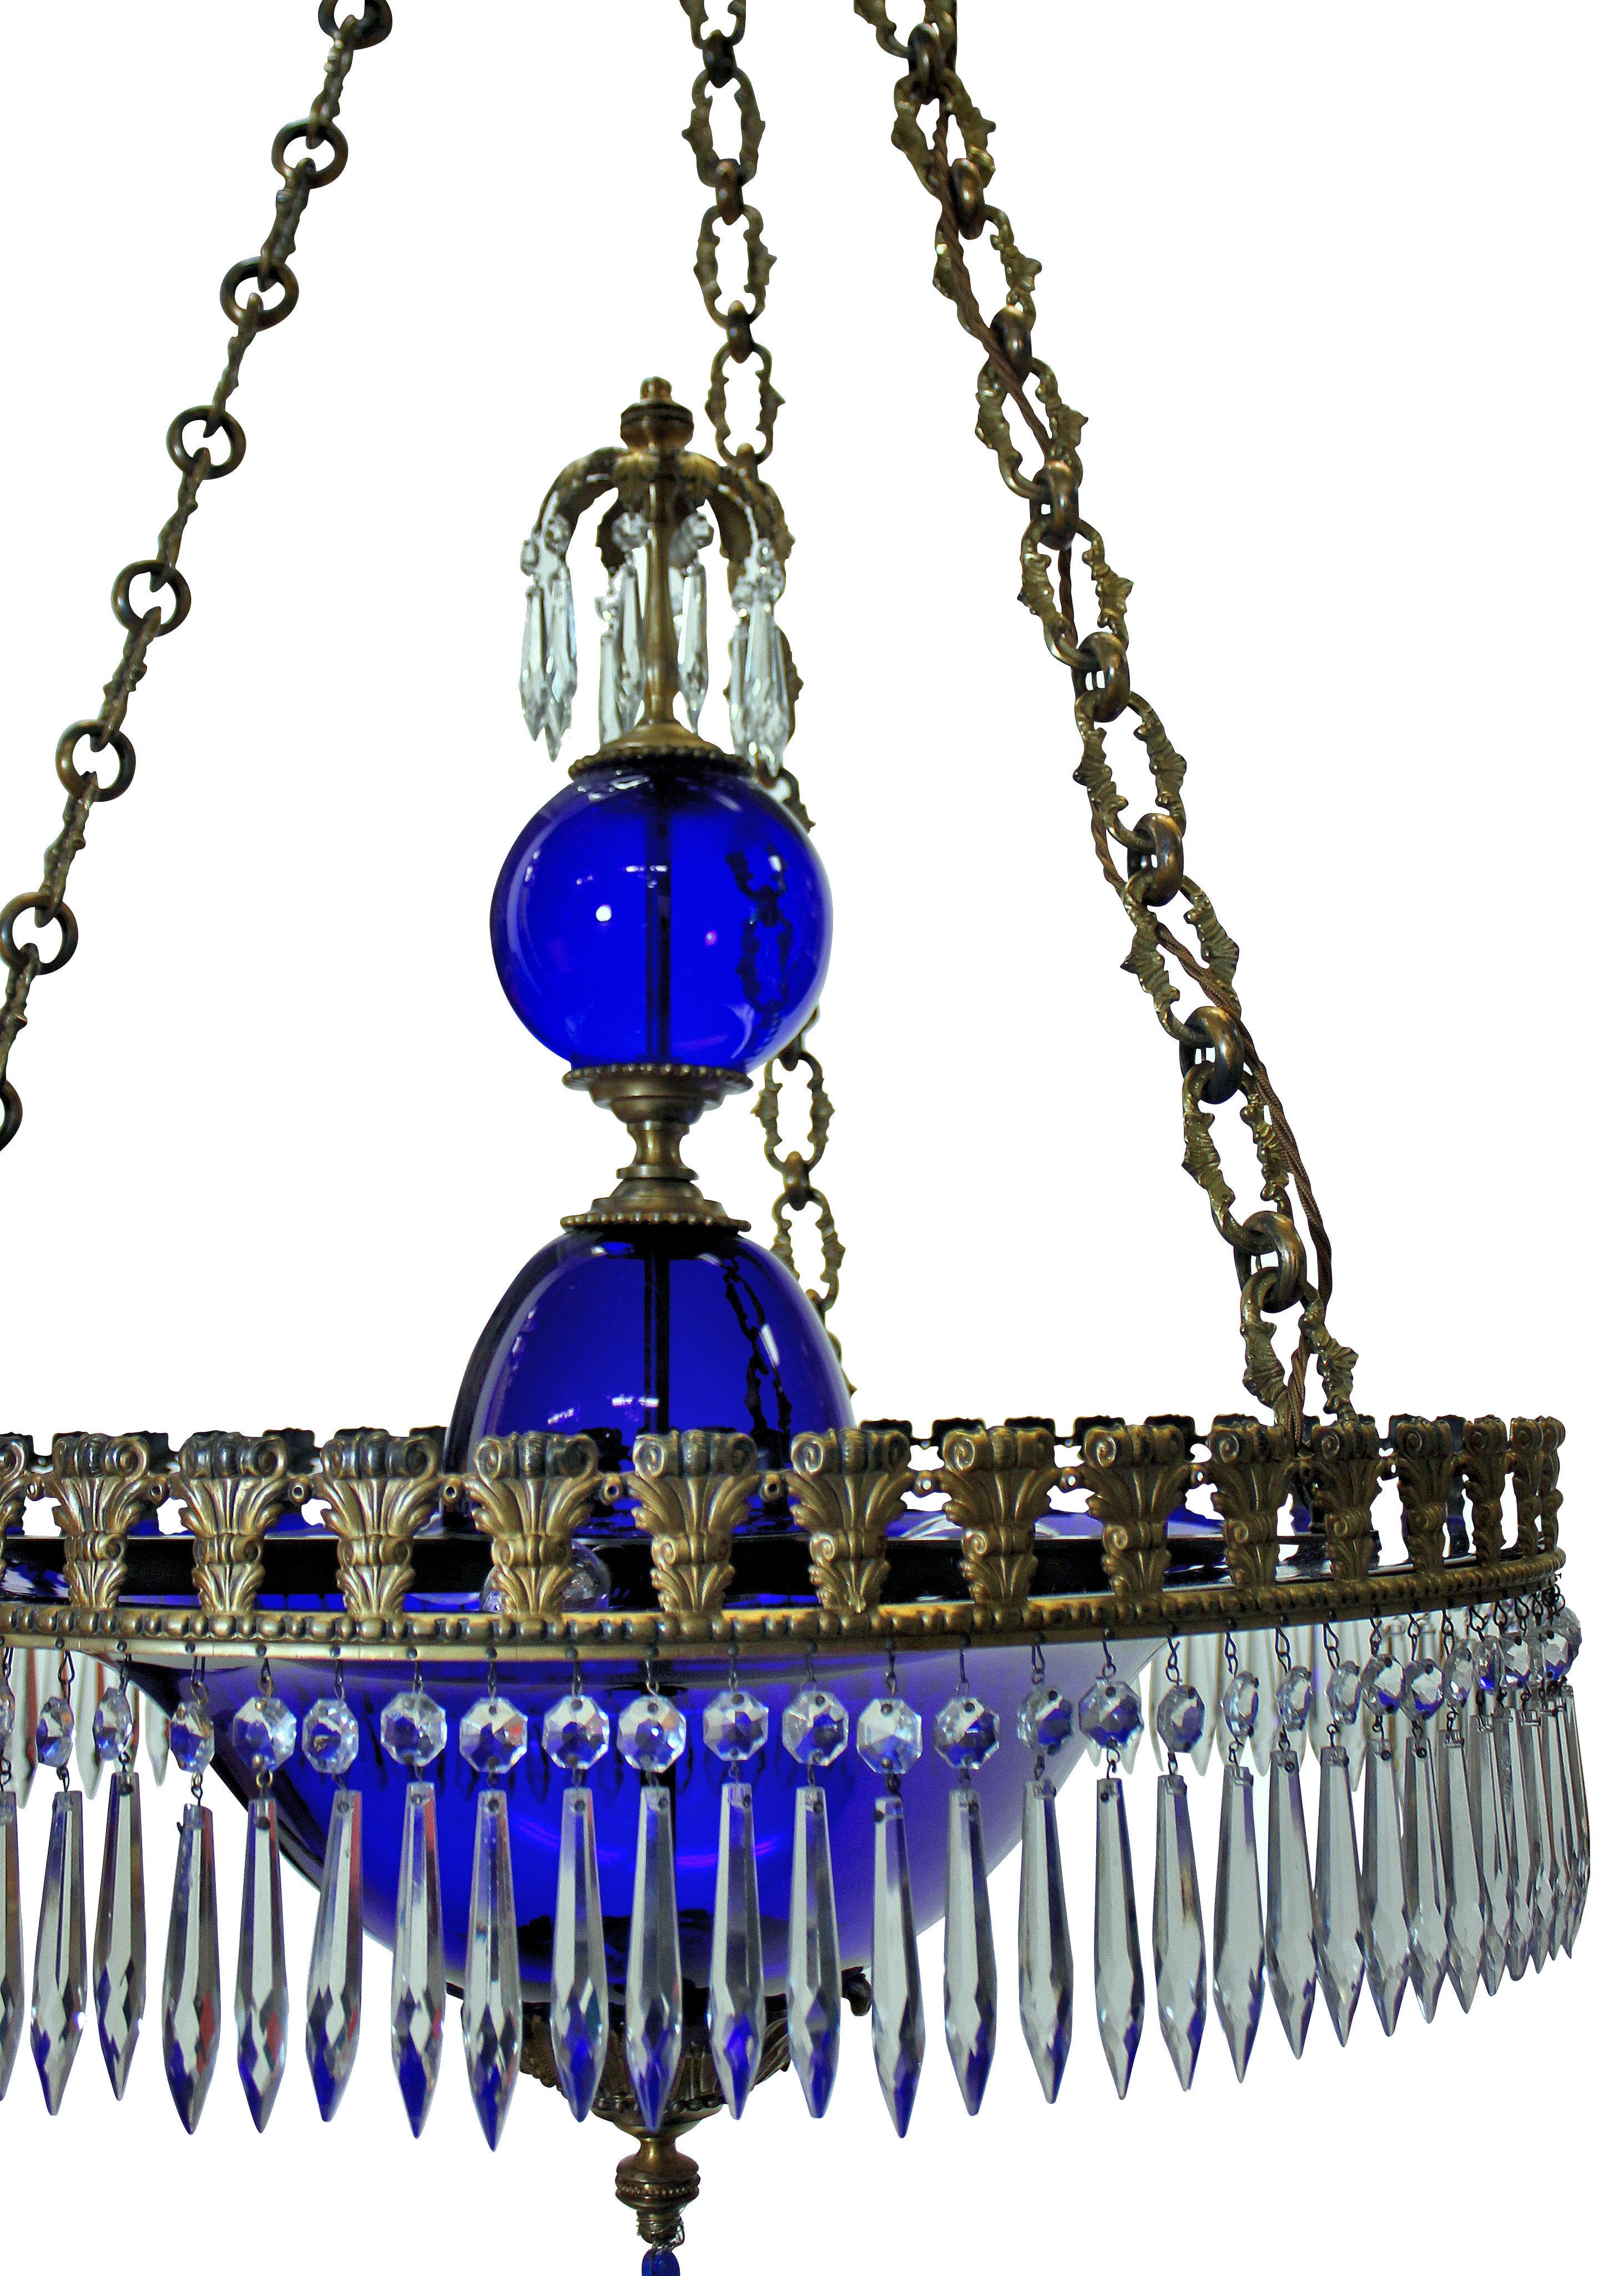 A fine Baltic blue glass Neo-Classical chandelier of corona form, in gilt bronze, with anthemion and acanthus decoration and decorative chains. Hung with clear glass pendants and blue finials.